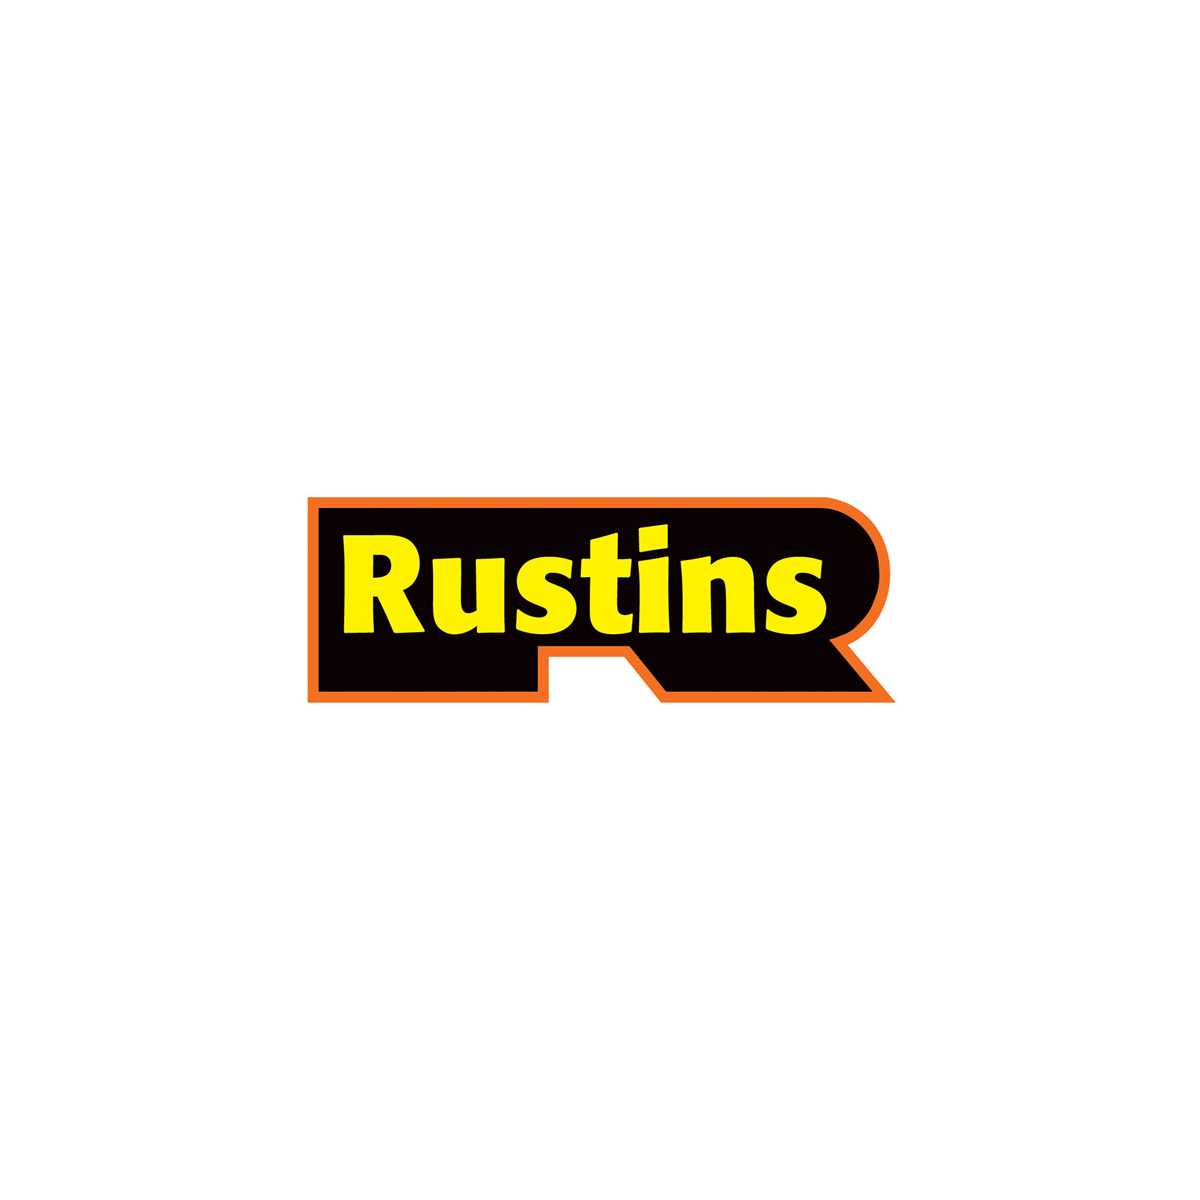 Where to buy Rustins Paints